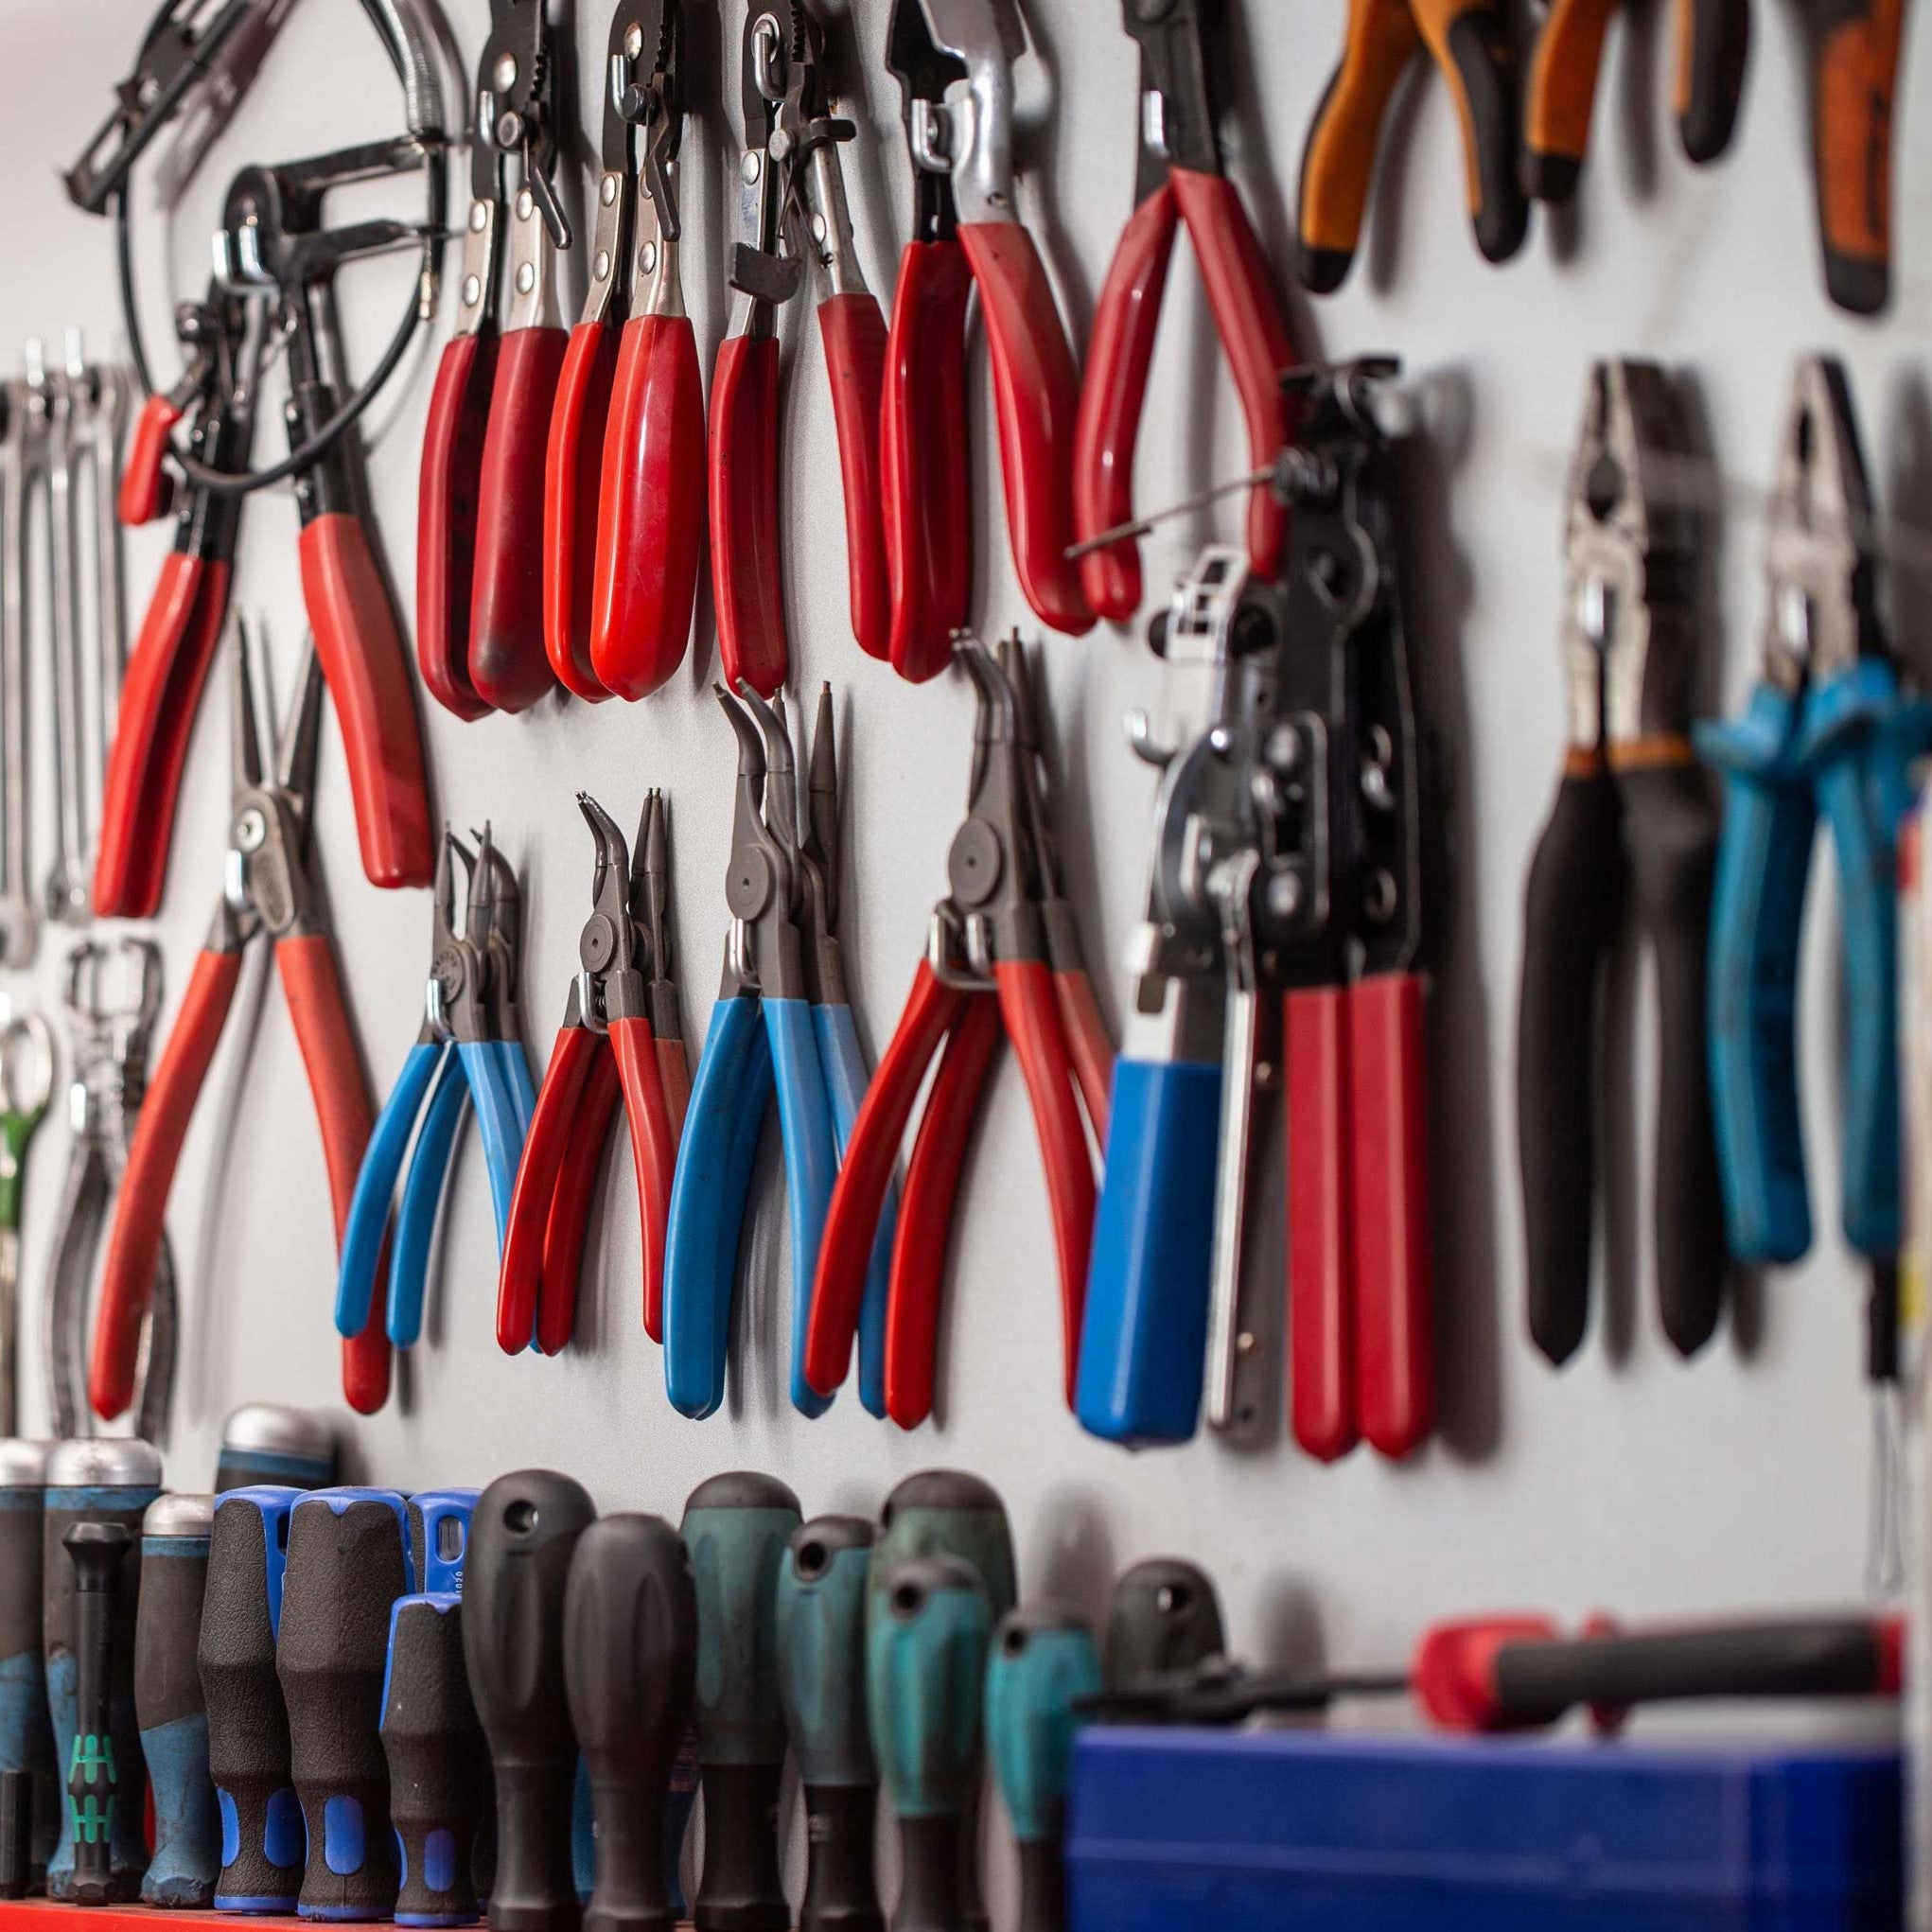 Which pliers are practical: Makita, Knipex, or Ingco?